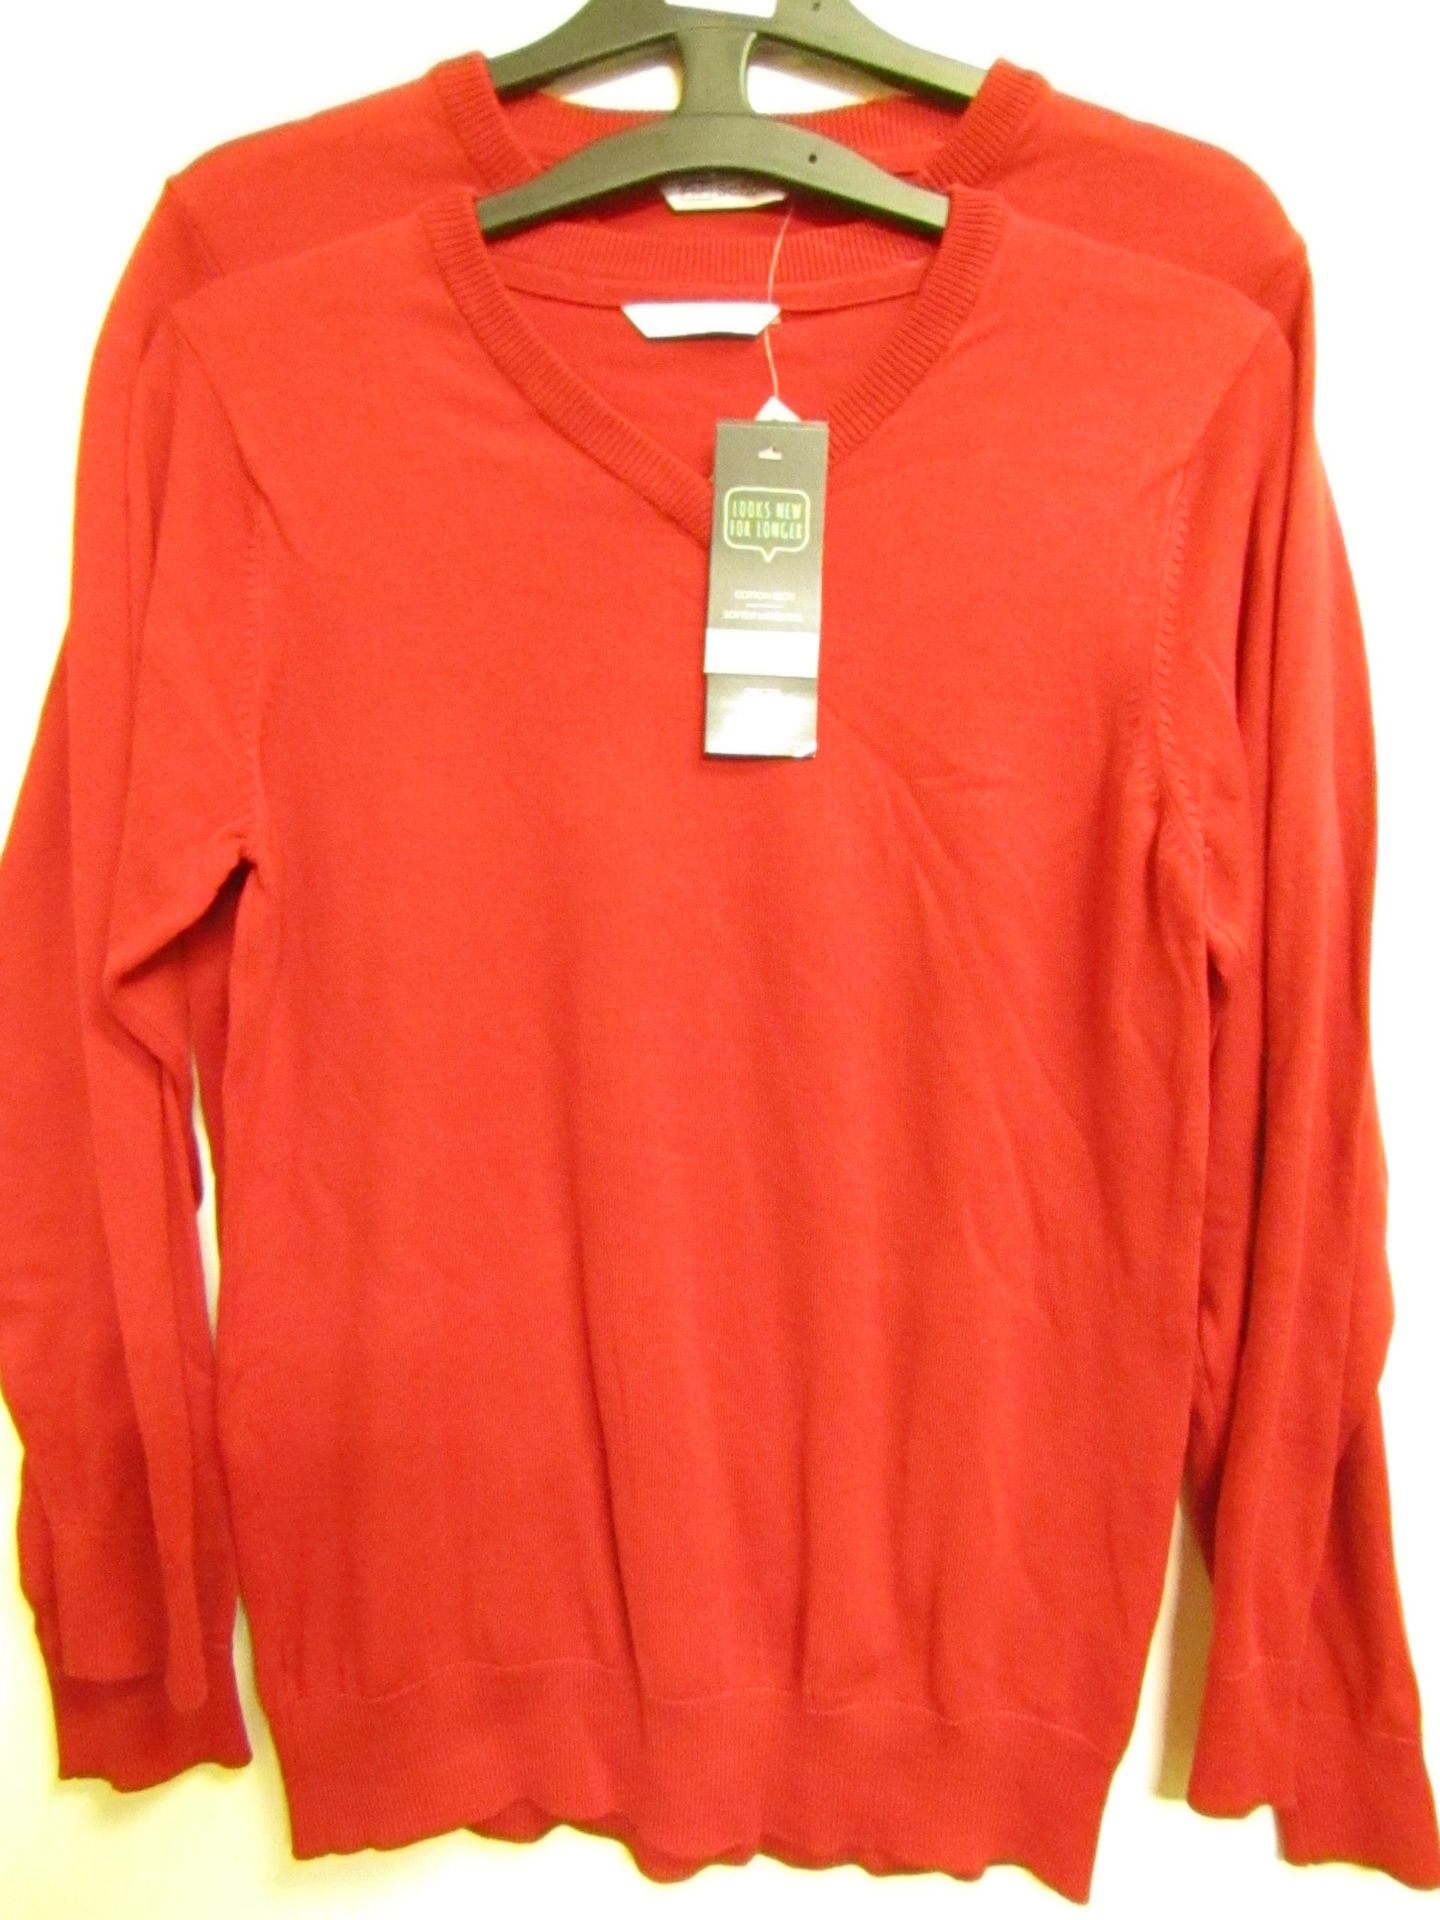 3x girls 2piece school cardigan red - size 10/11 - new but might have security tags on.